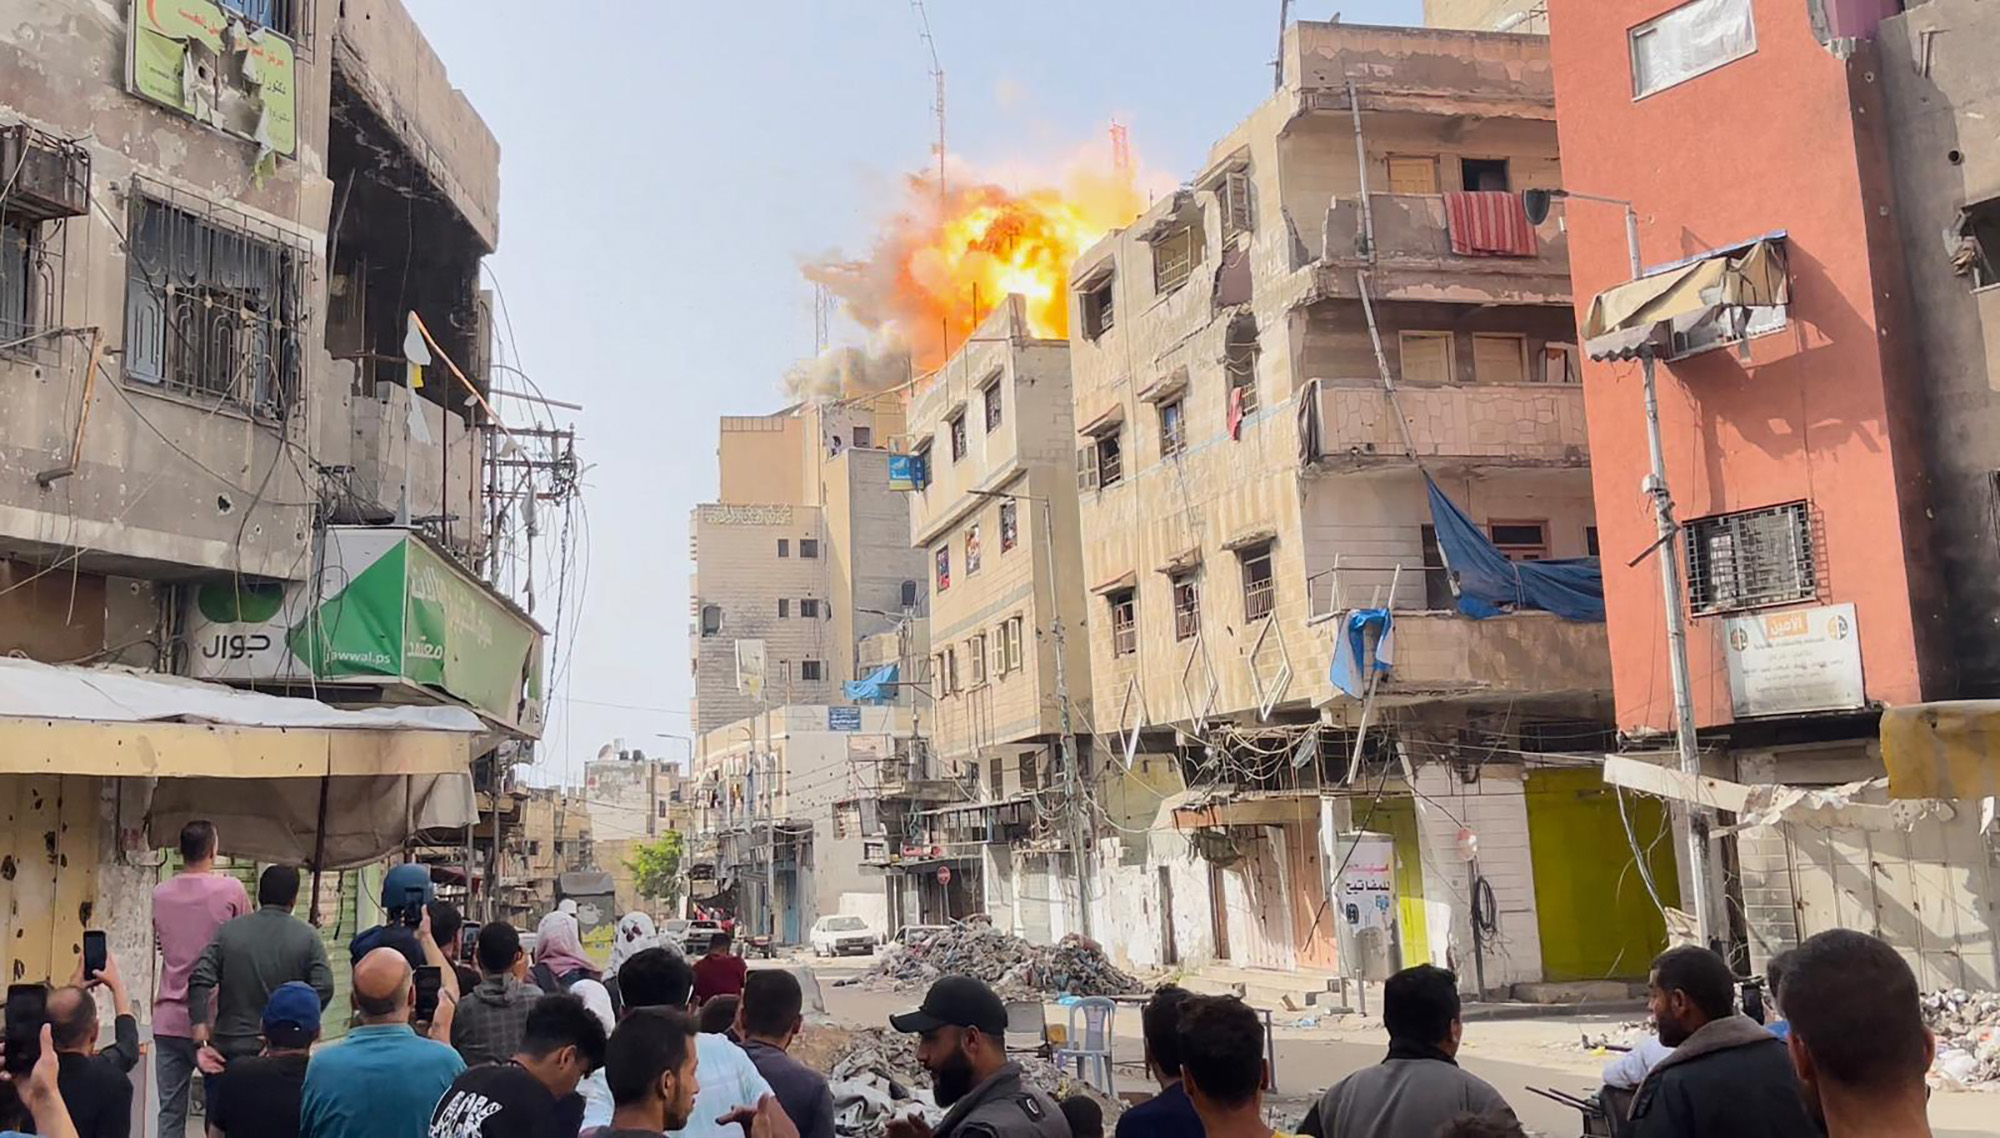 Smoke rises above the al-Sahaba building after an attack by the Israeli army in the al-Daraj neighborhood, Gaza, on April 22.